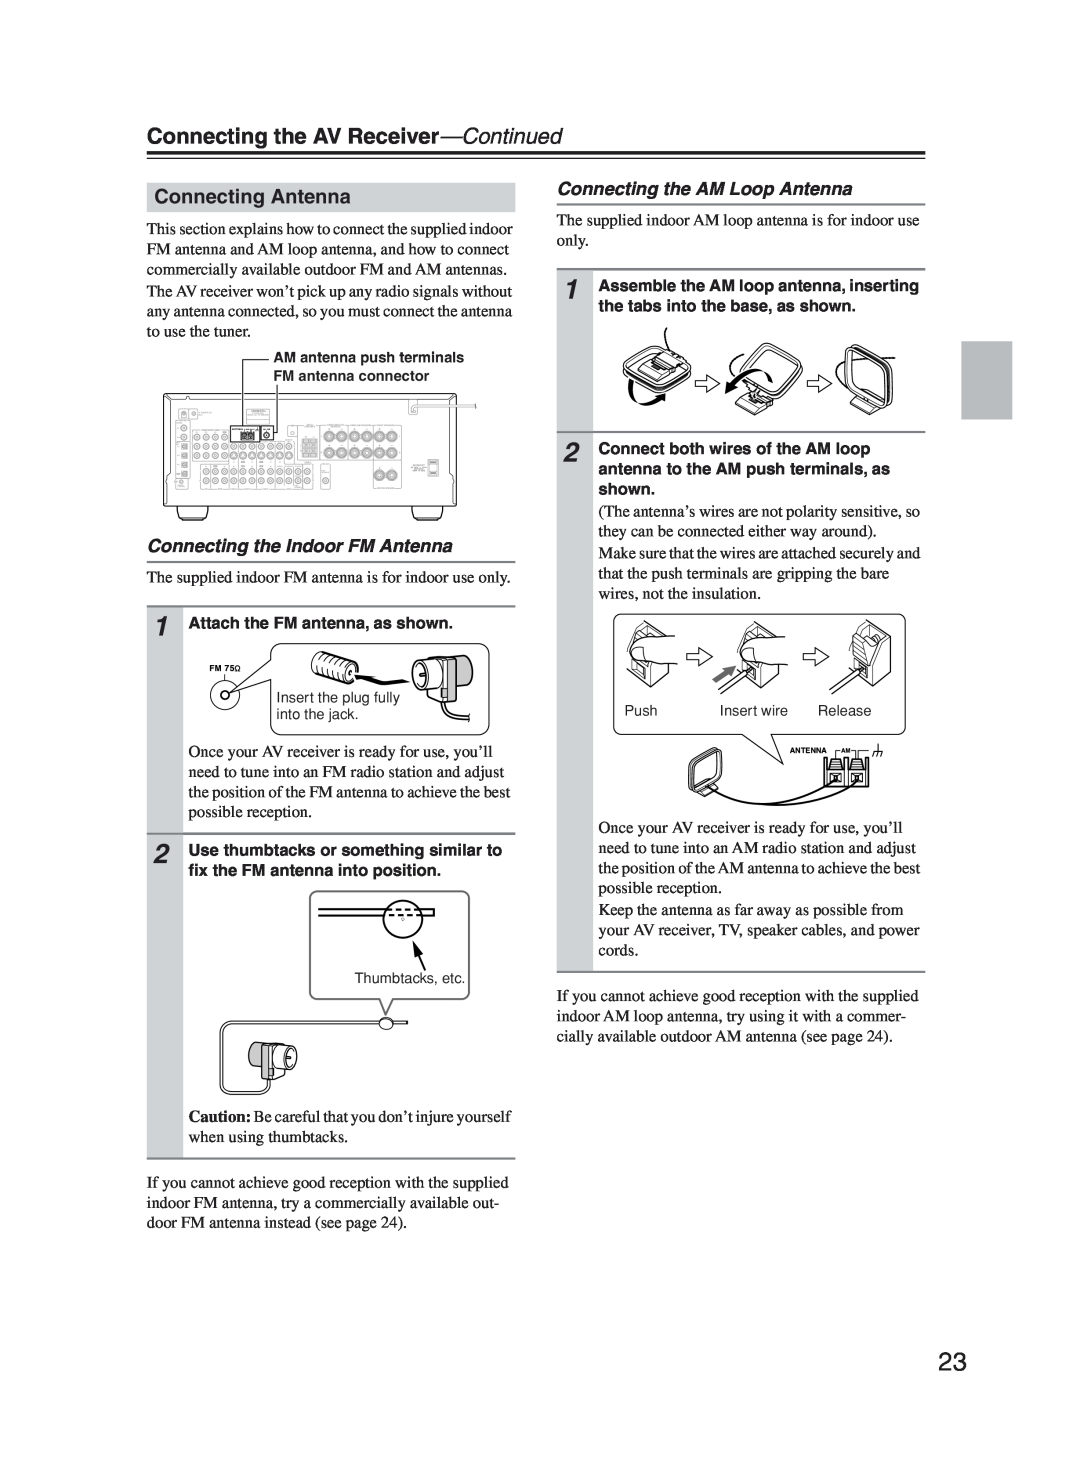 Onkyo TX-SR603X instruction manual Connecting Antenna, Connecting the Indoor FM Antenna, Connecting the AM Loop Antenna 